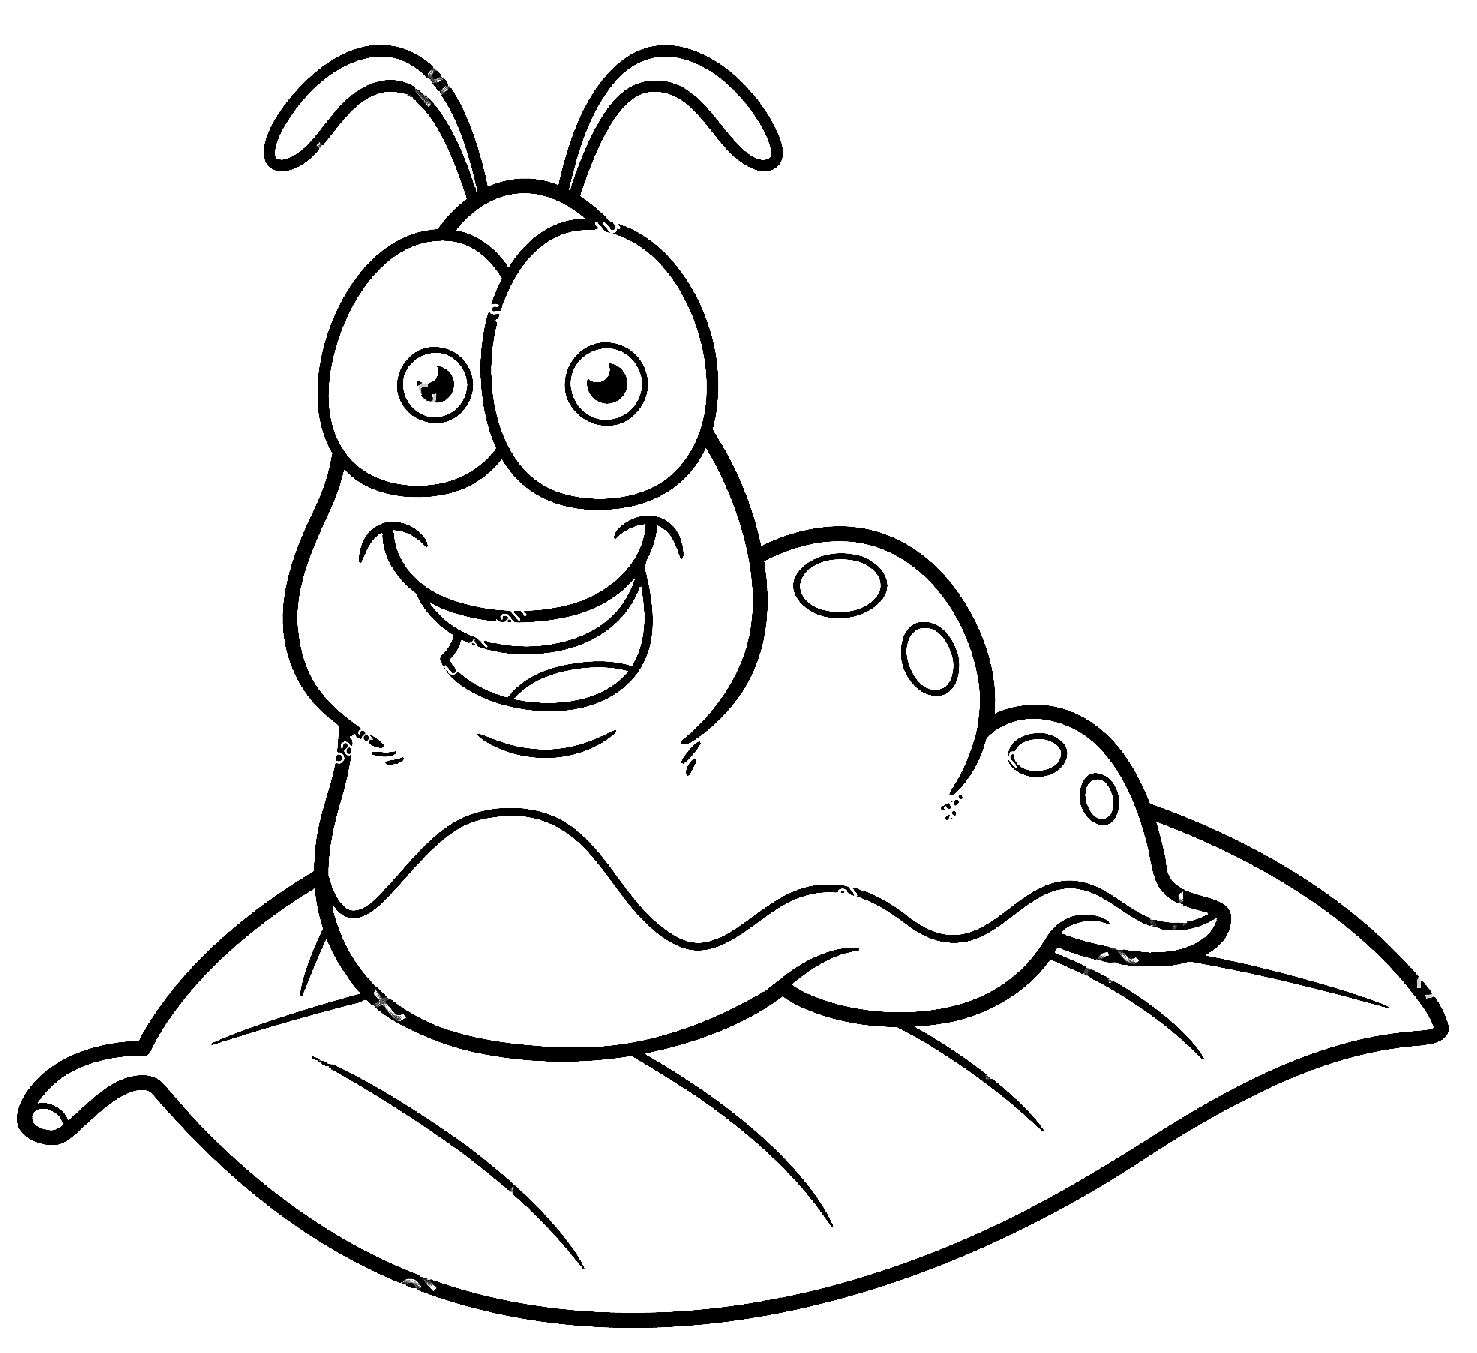 Cute Cartoon Worm Coloring Pages